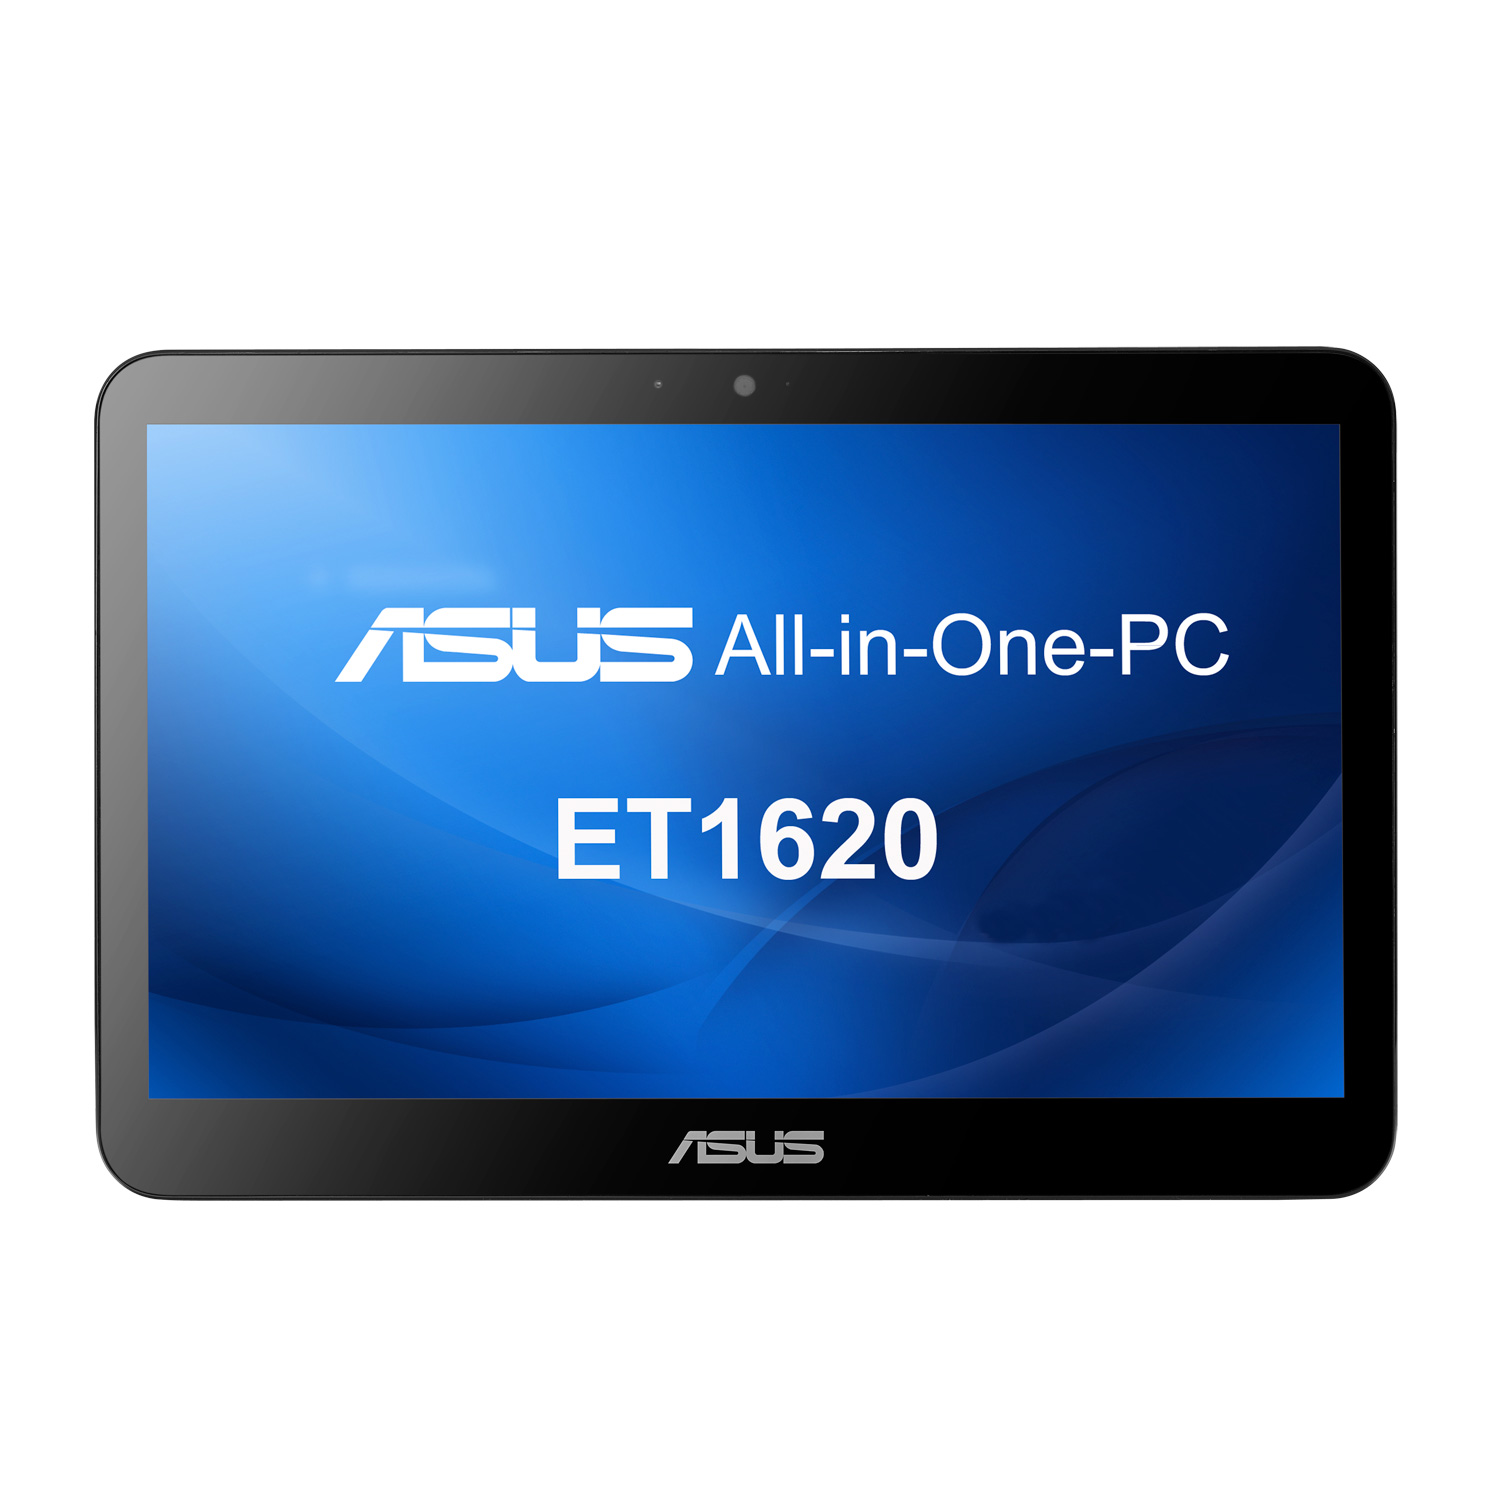 asus camera driver windows 10 all in one